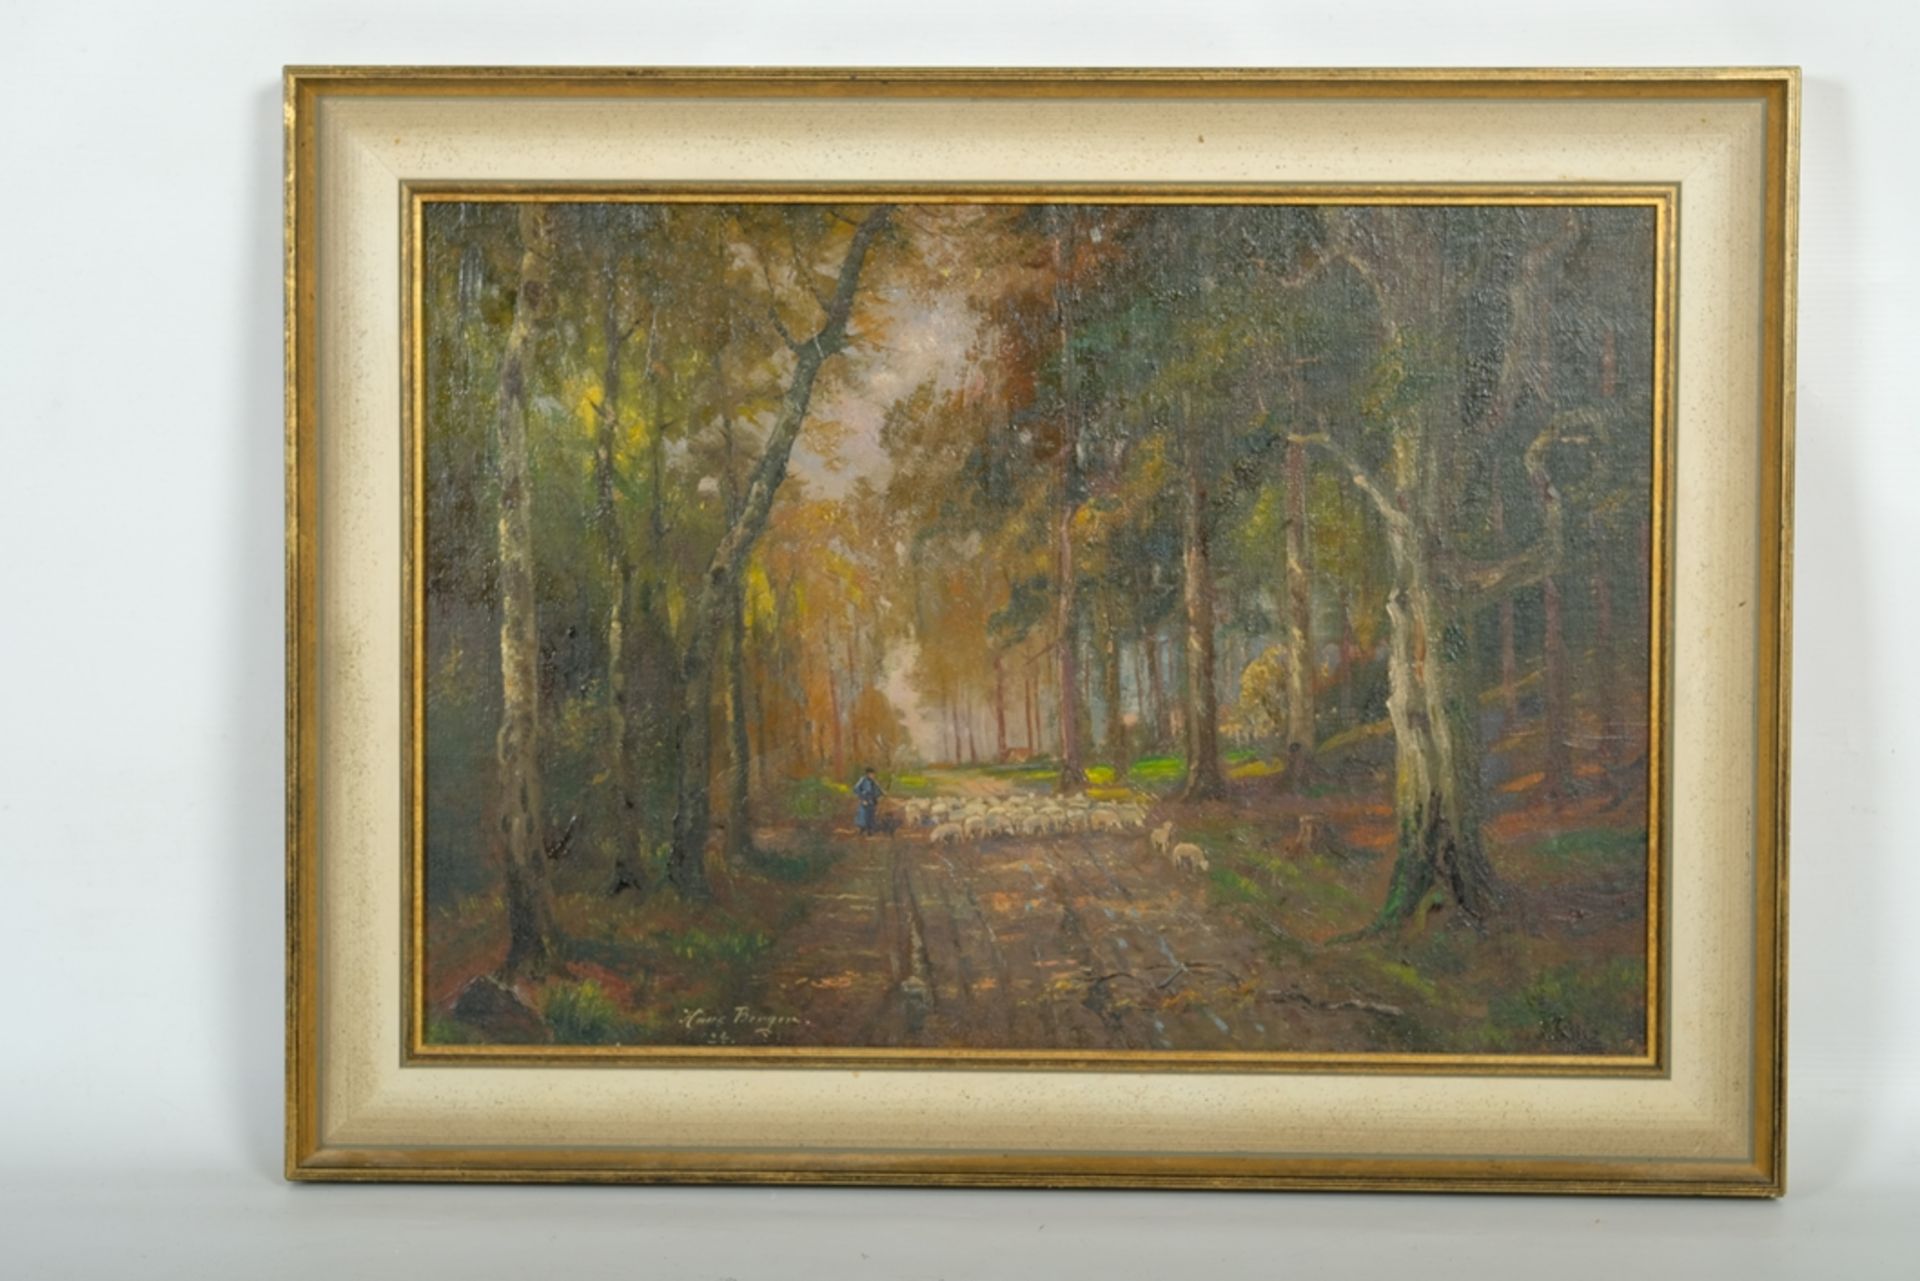 Berger, Hans (1882-1977) Shepherd scene in the forest, oil on canvas / cardboard, 1924.  - Image 2 of 4